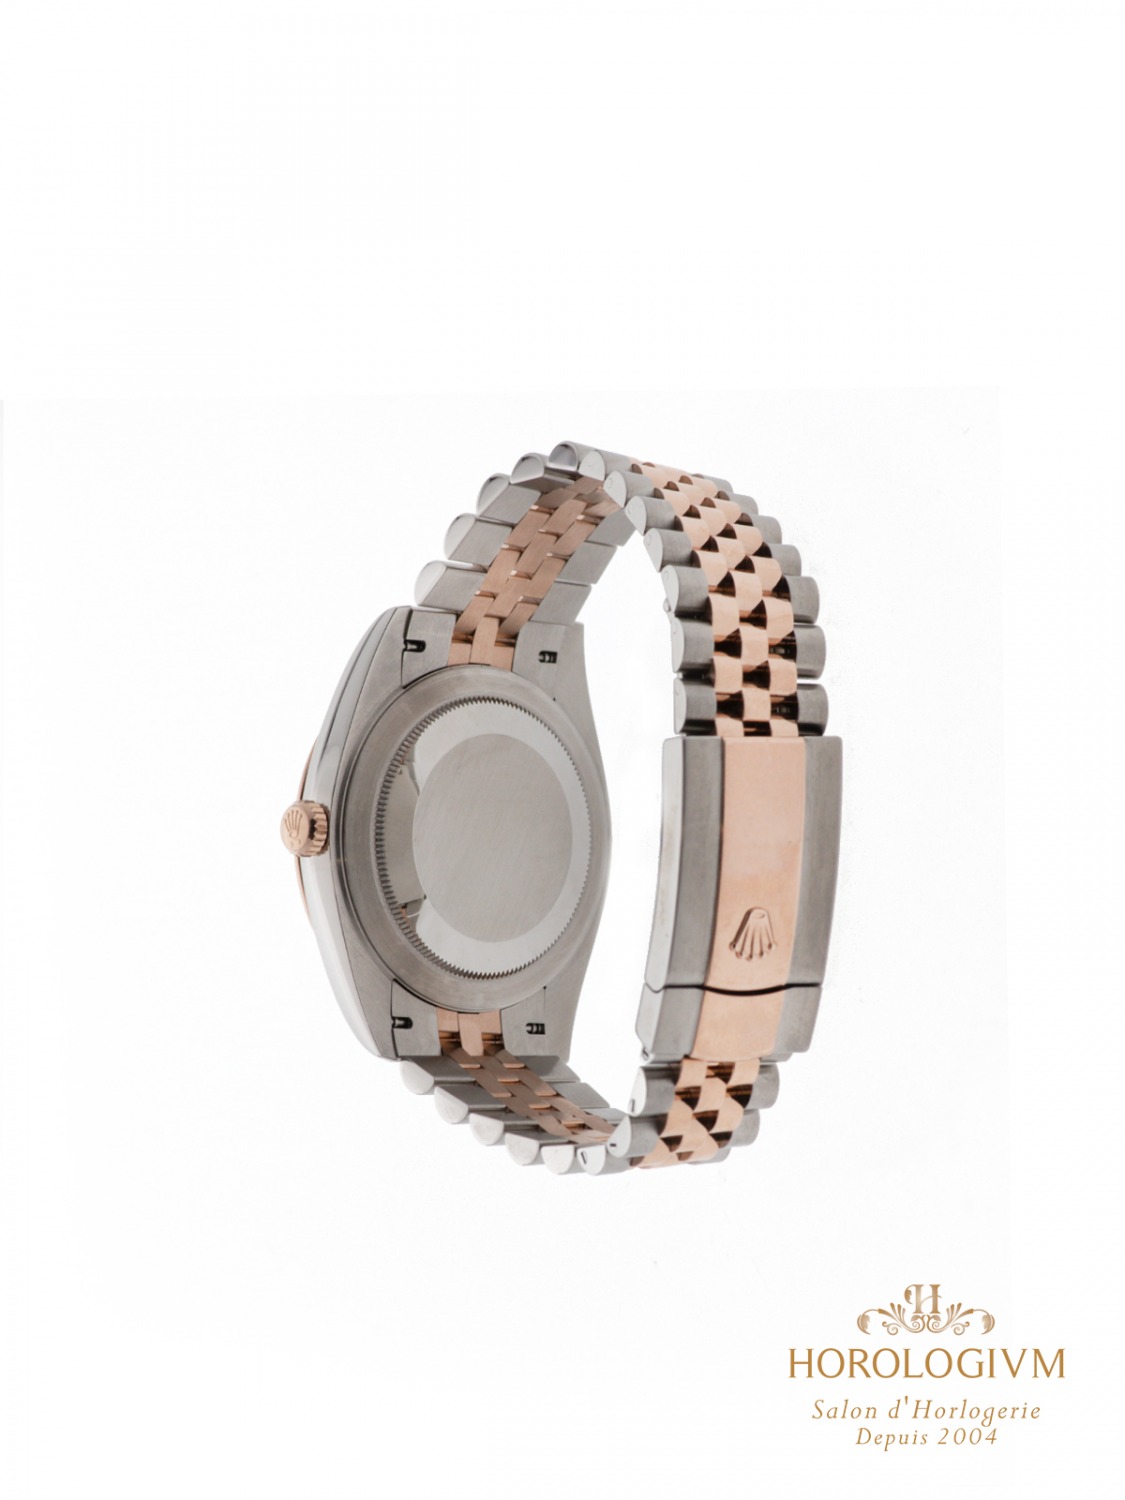 Rolex Datejust TWO TONE 41 MM Ref. 126331, watch, two-tone (bi-colored) silver & rose gold (case) and rose gold (bezel)